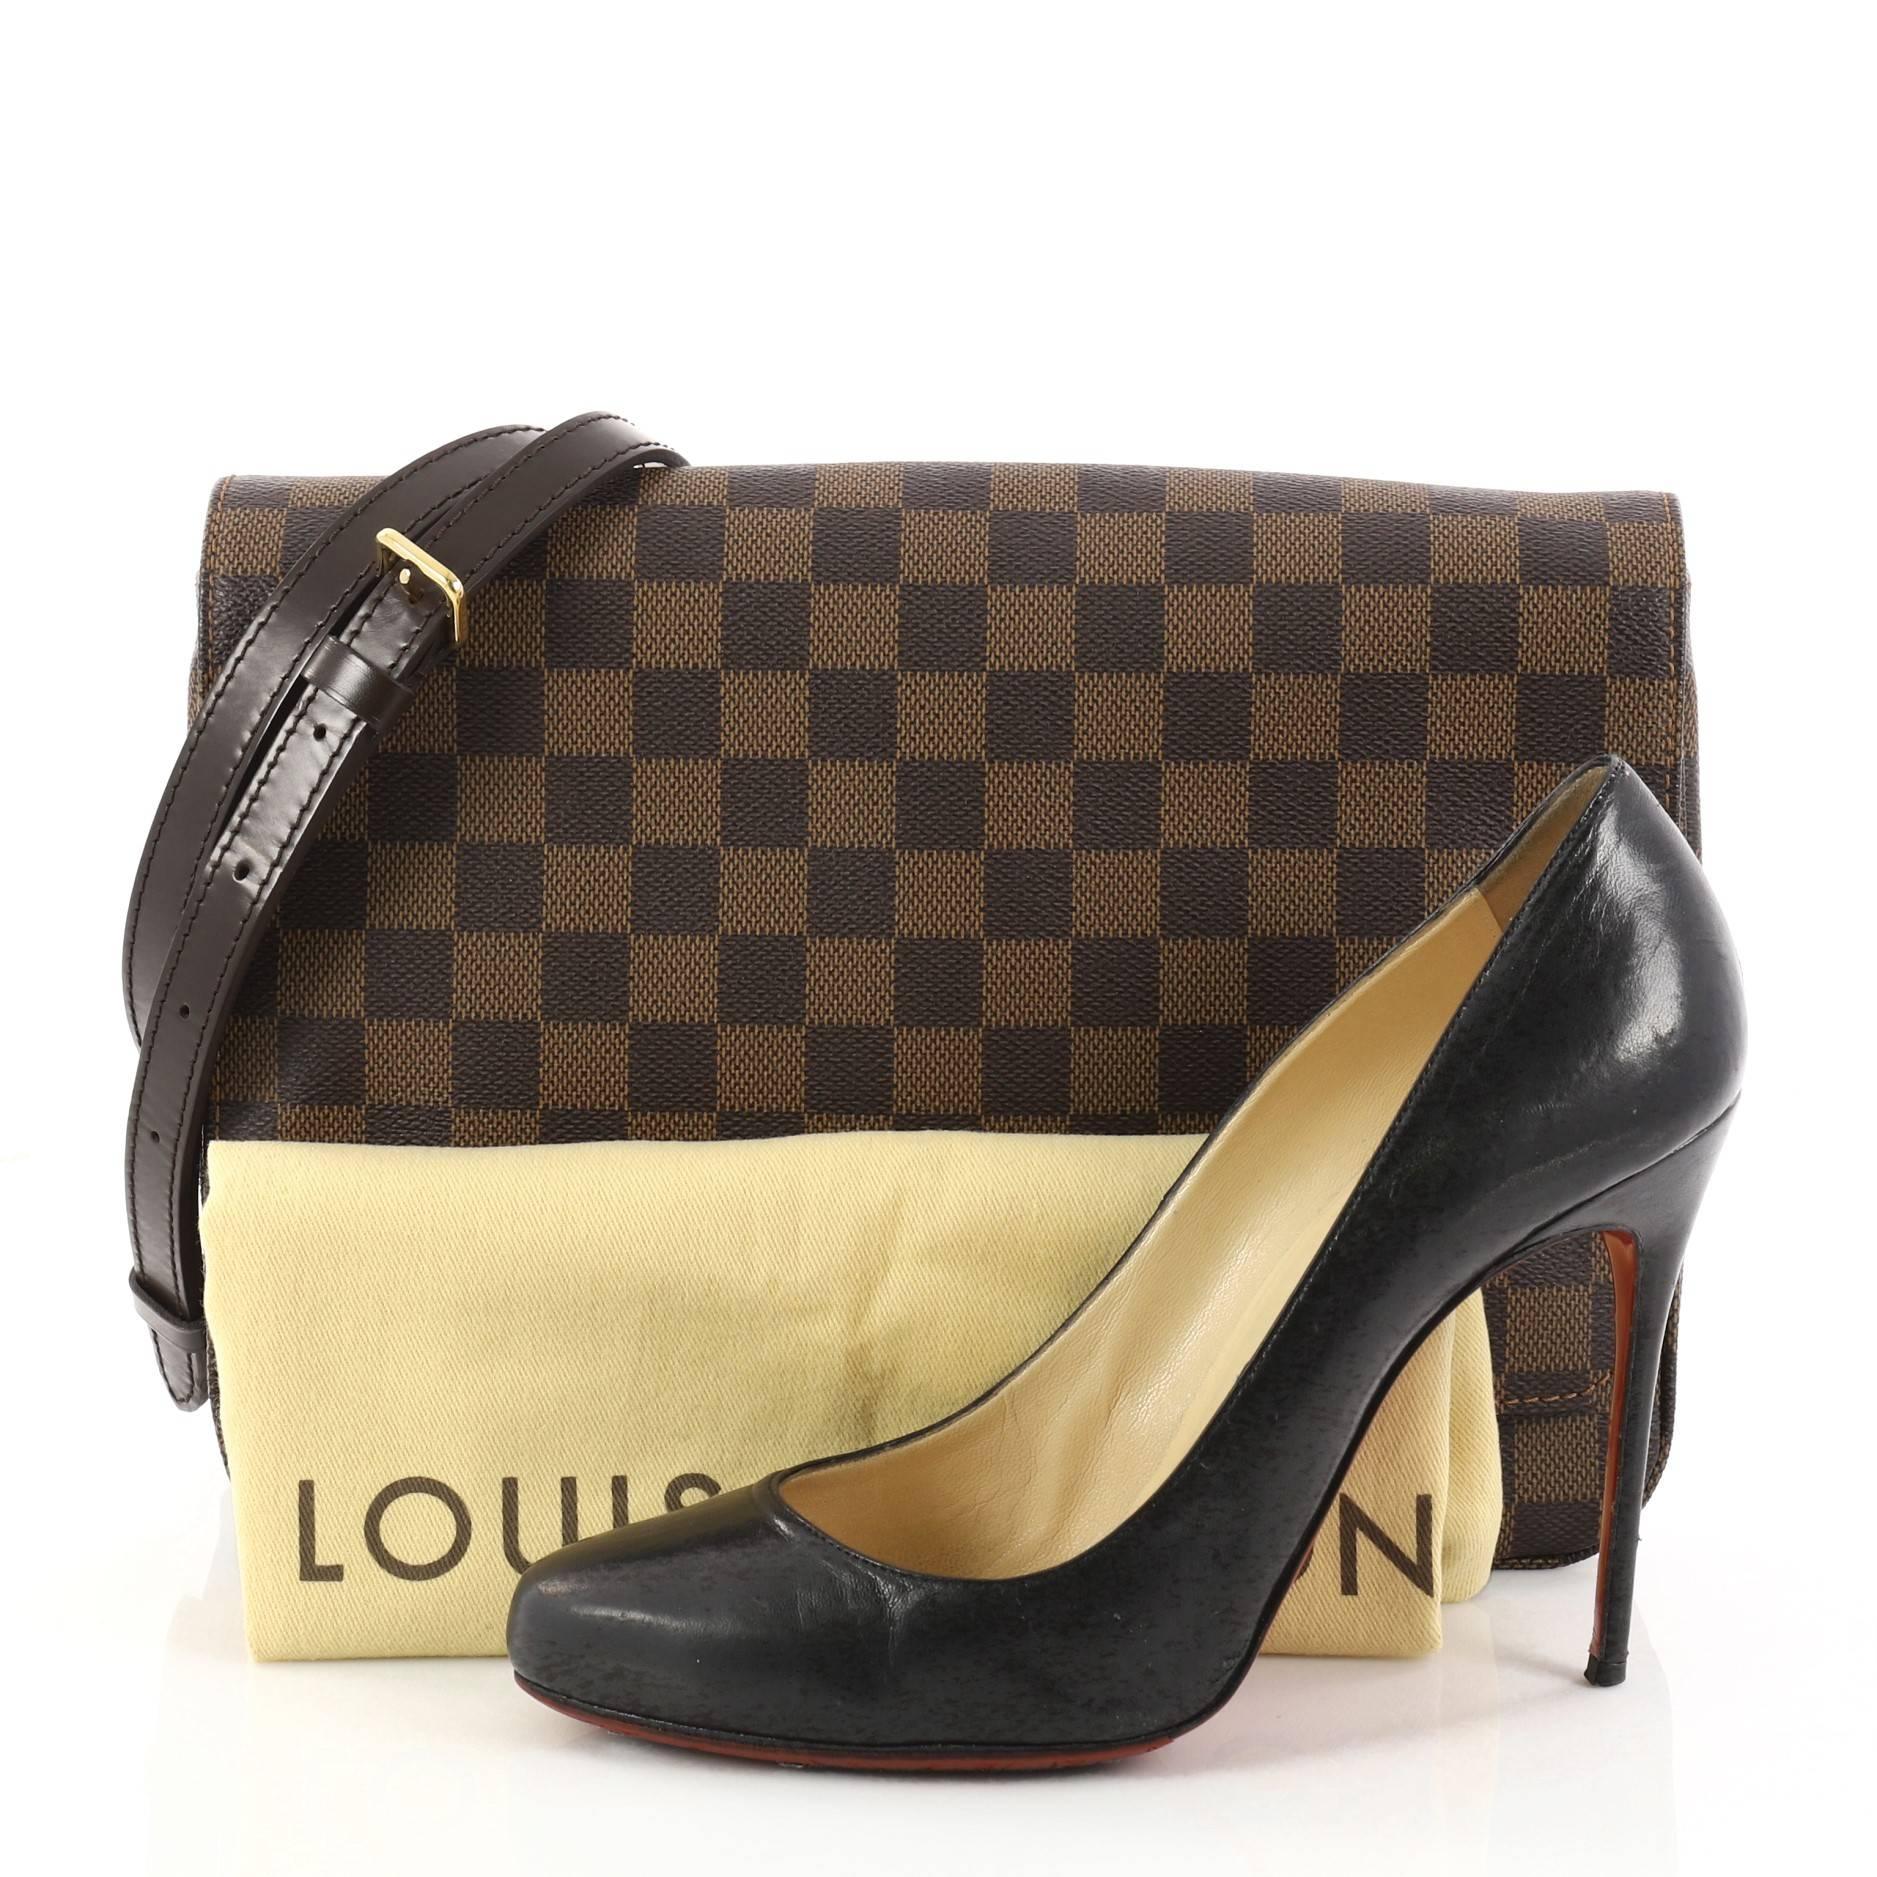 This authentic Louis Vuitton Hoxton Handbag Damier GM is a beautiful messenger bag ideal for daily use. Crafted from damier ebene coated canvas, this bag features adjustable shoulder strap, exterior back zip pocket and gold-tone hardware accents.